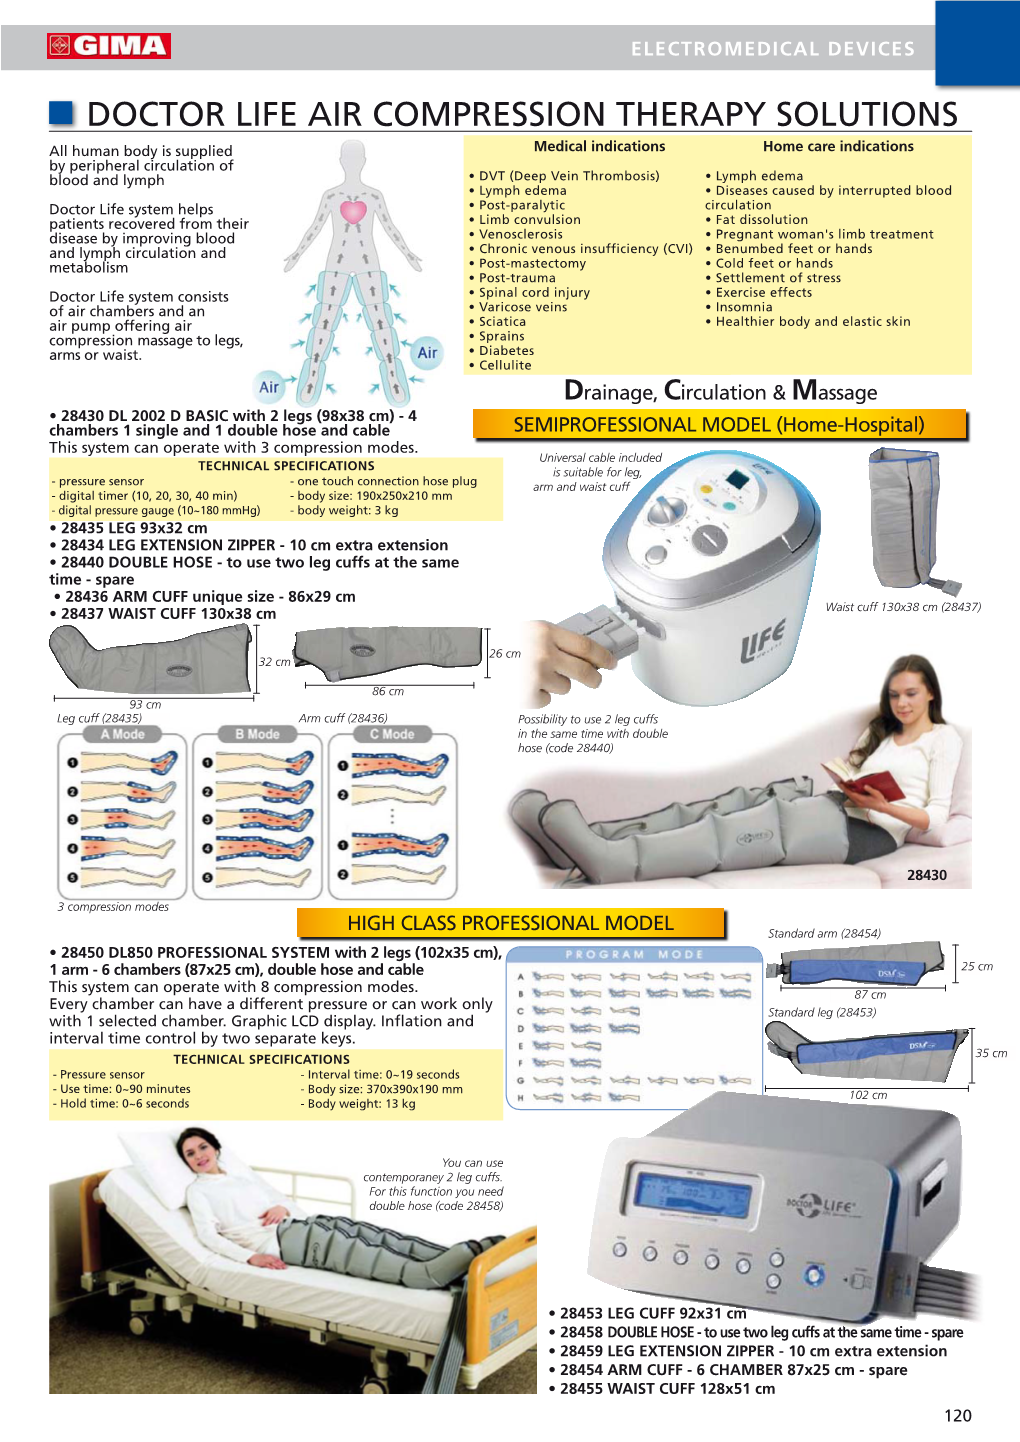 Doctor Life Air Compression Therapy Solutions